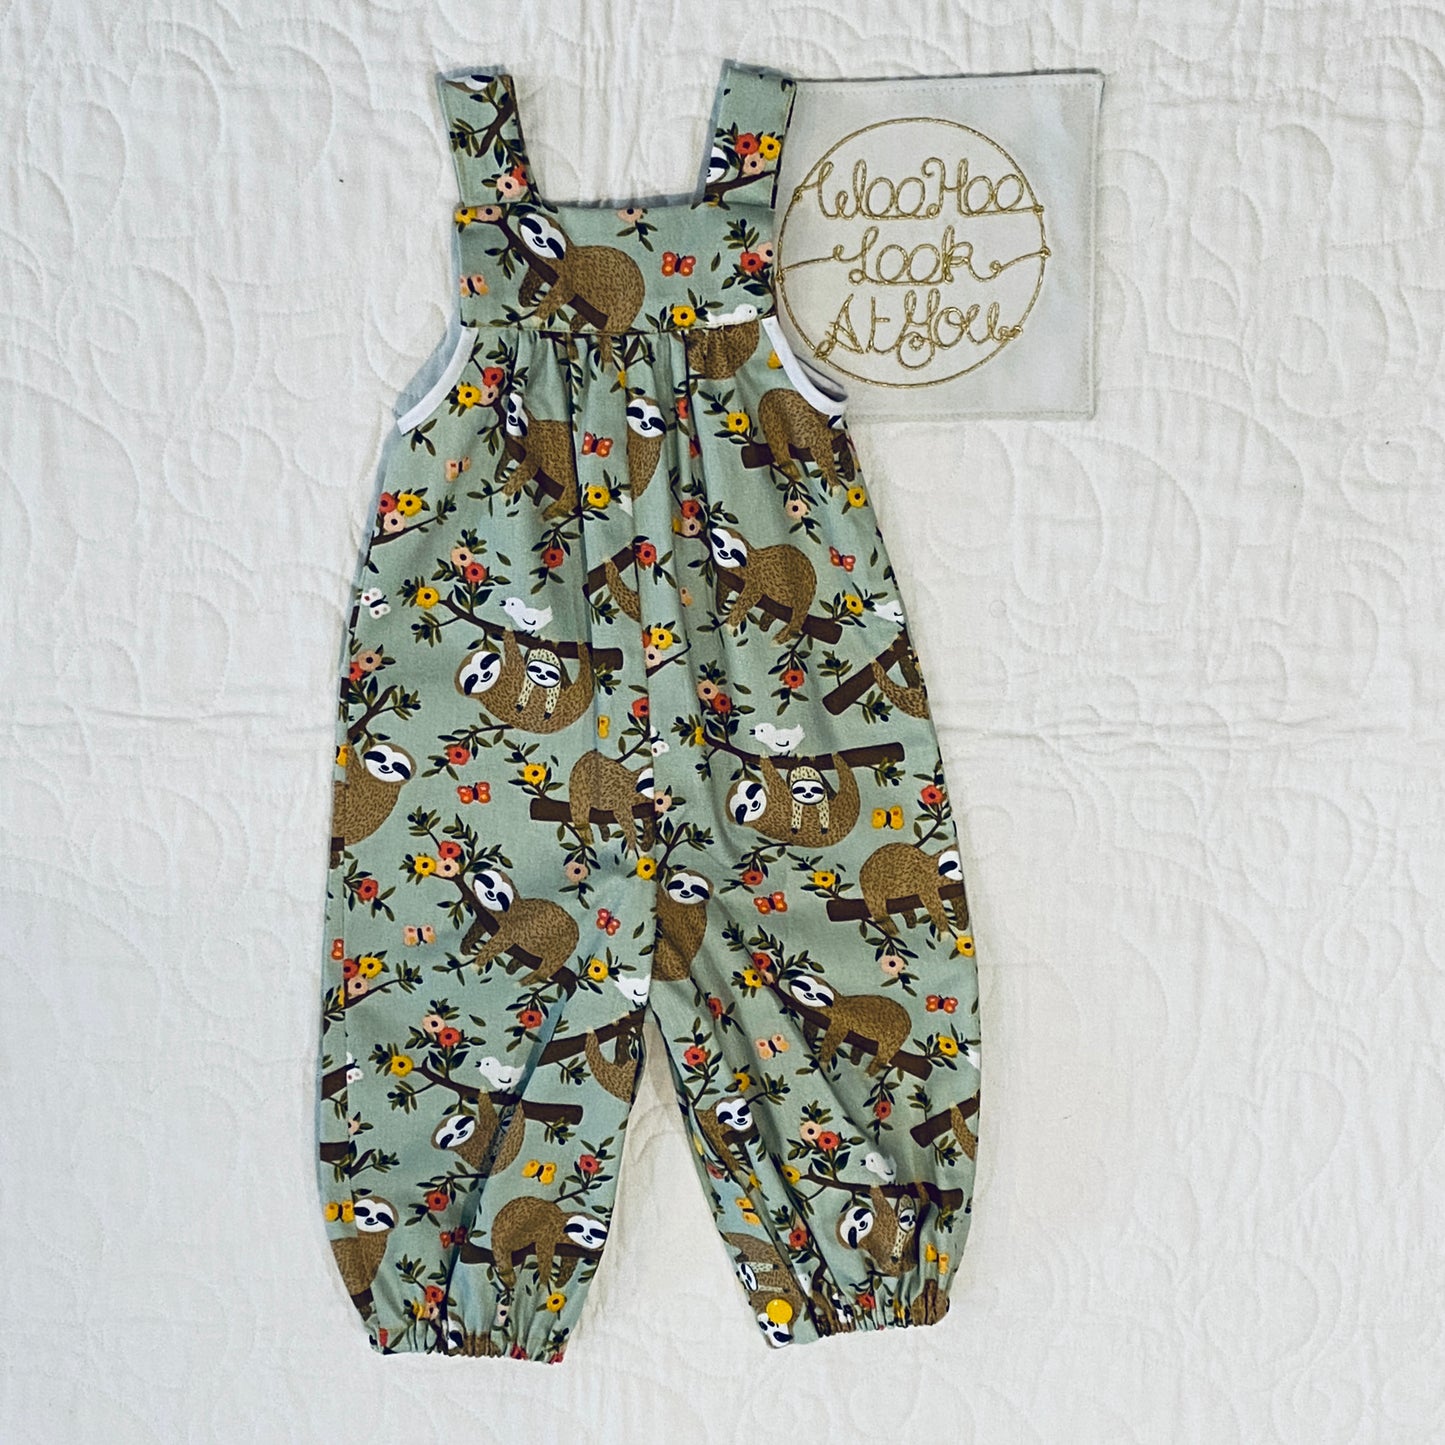 Overalls - Cute Sloths and a Pocket for Rocks